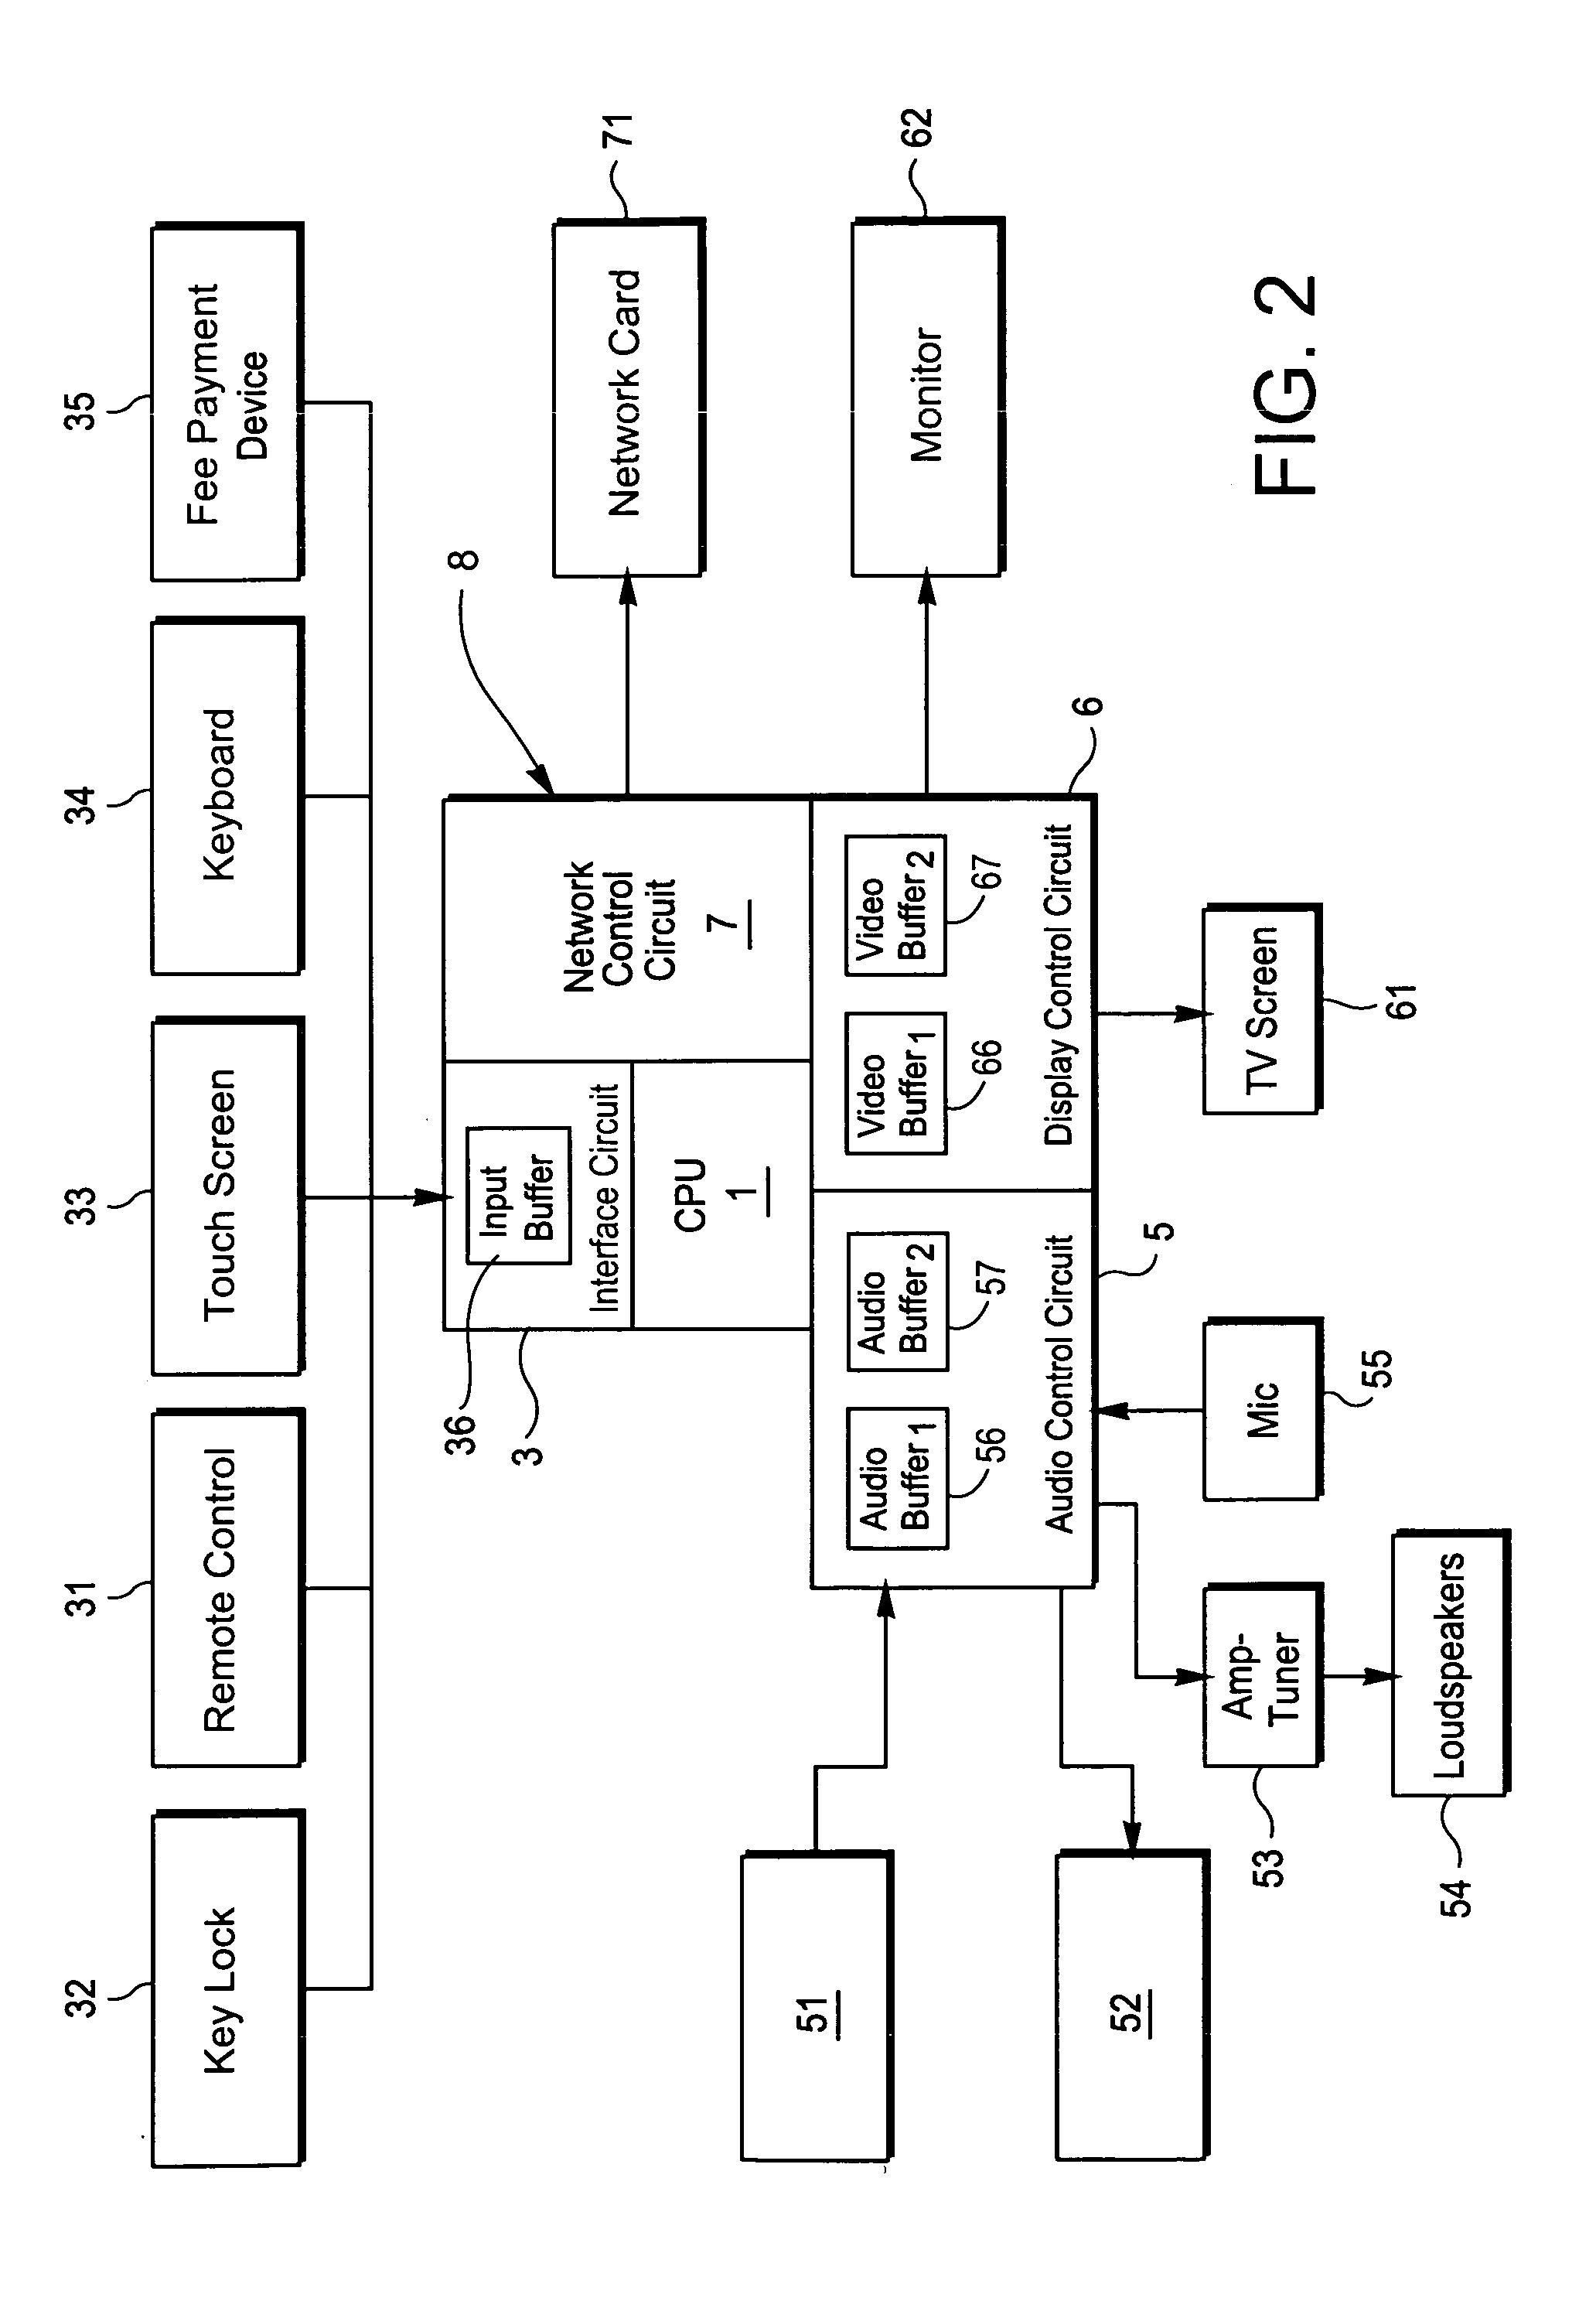 Audiovisual distribution system for playing an audiovisual piece among a plurality of audiovisual devices connected to a central server through a network